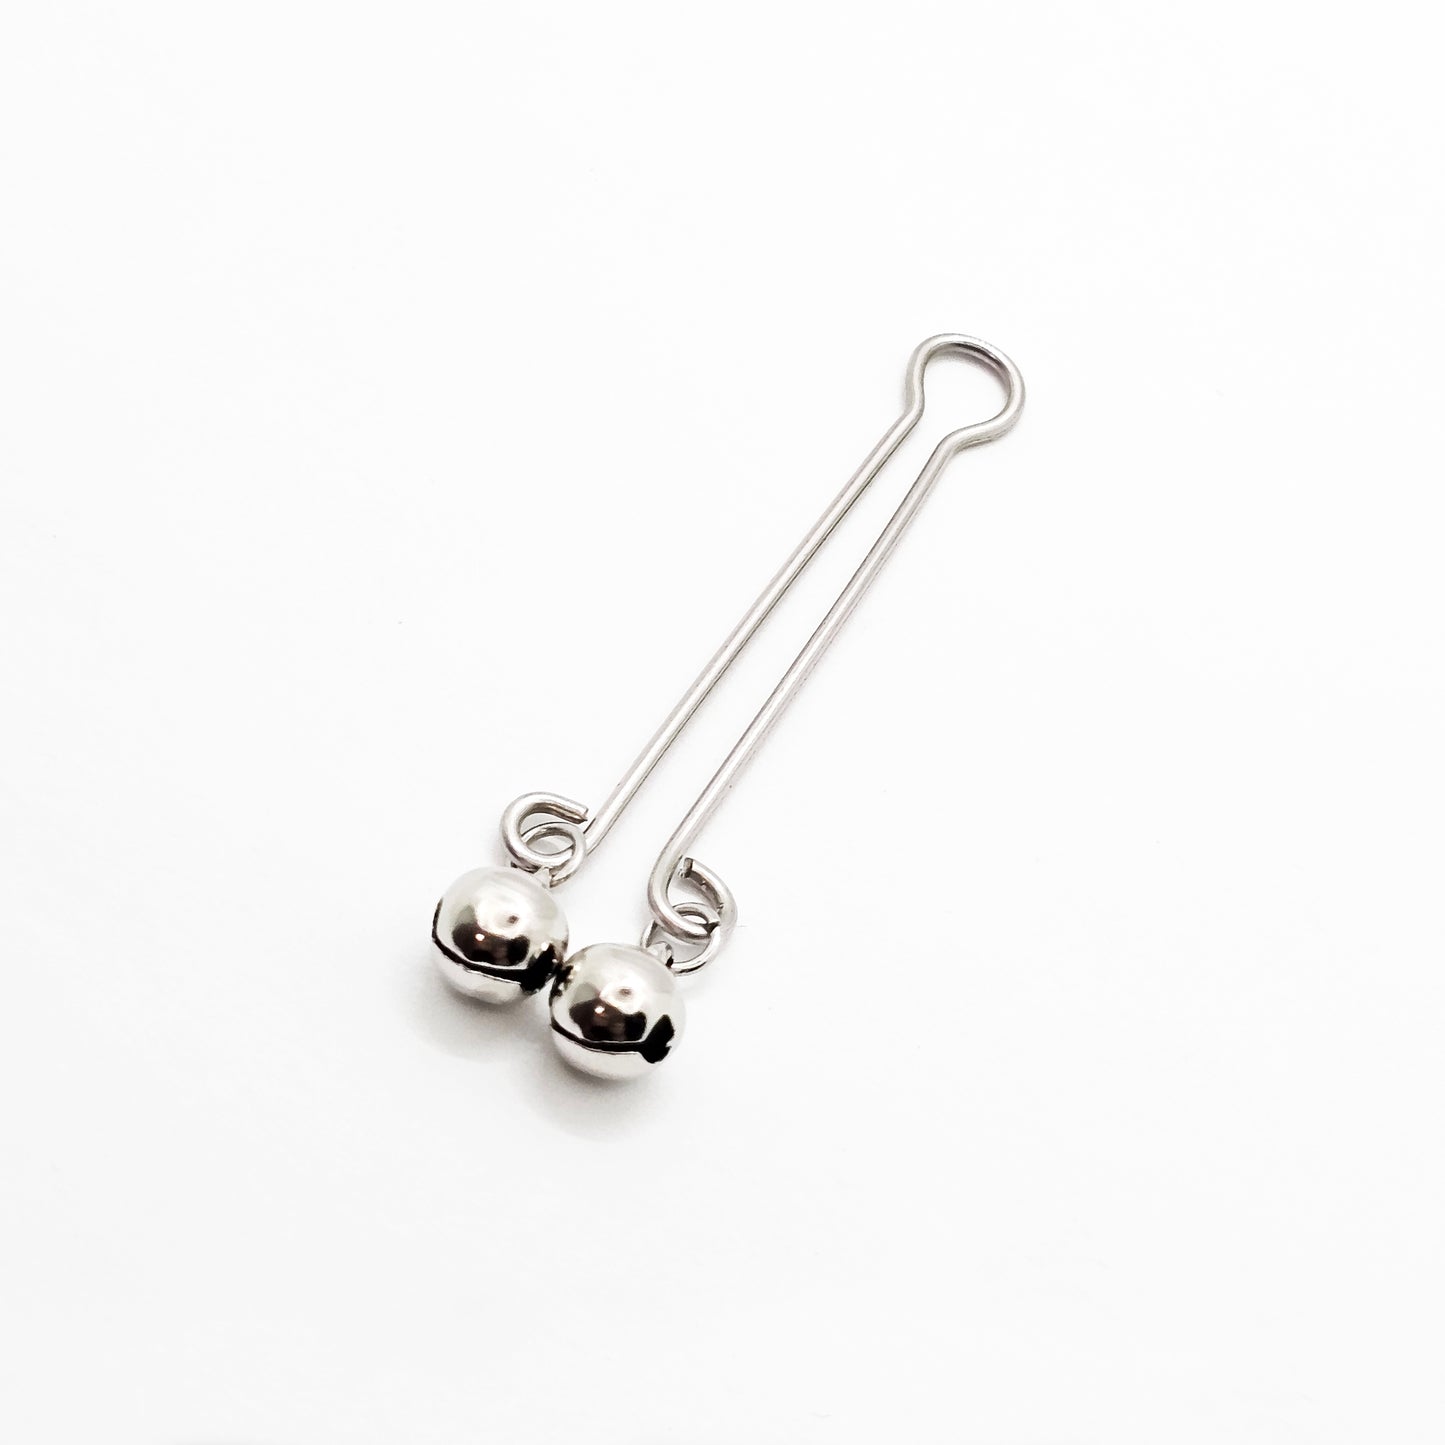 Labia Clip with Bells, Stainless Steel. Non Piercing Vaginal Jewelry, MATURE, BDSM